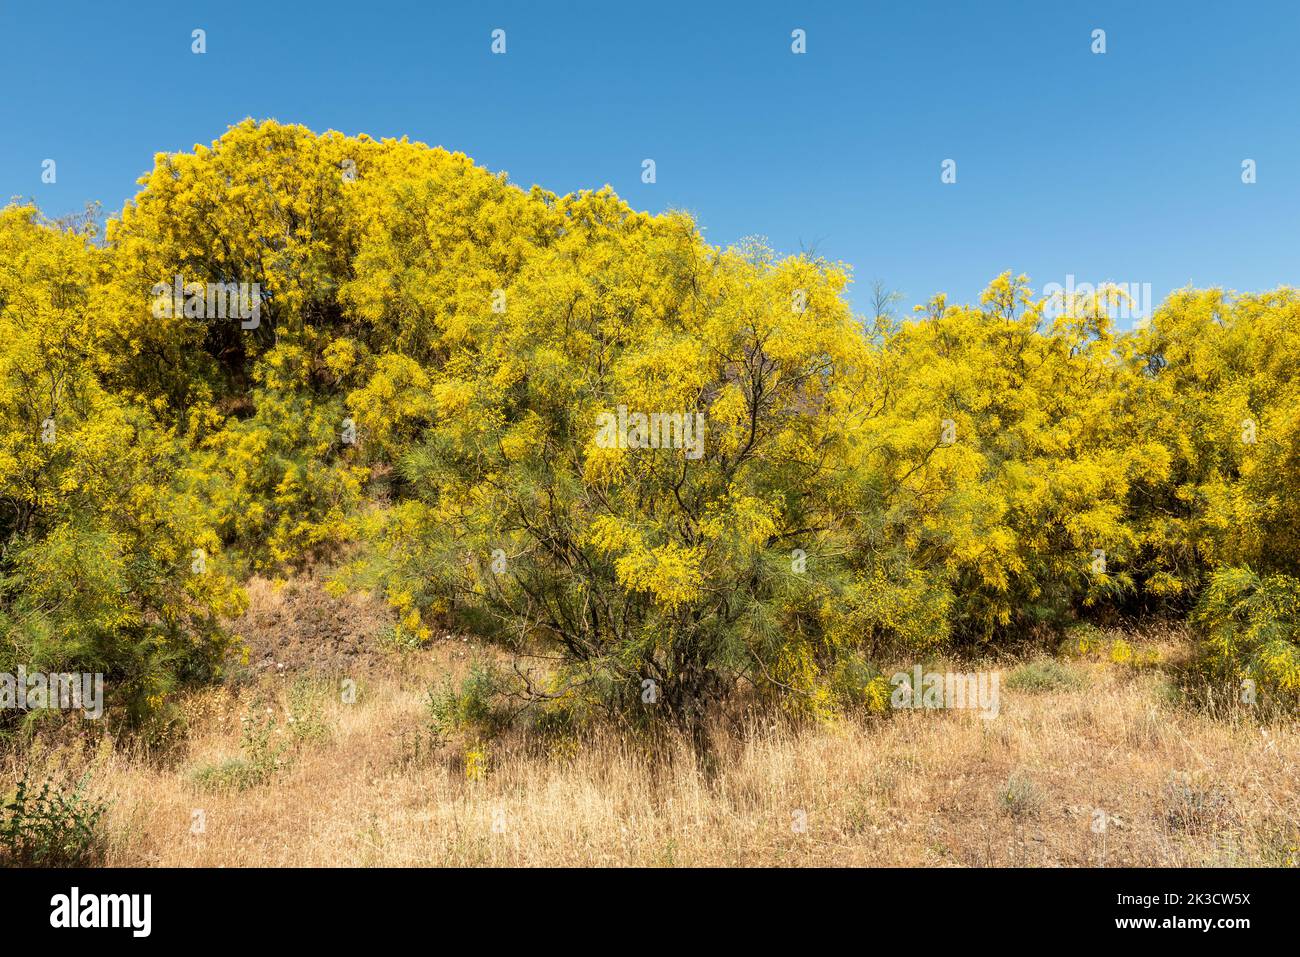 The Mount Etna broom (Genista aetnensis) in flower, a spectacular sight in summertime growing high on the slopes of the famous Sicilian volcano Stock Photo